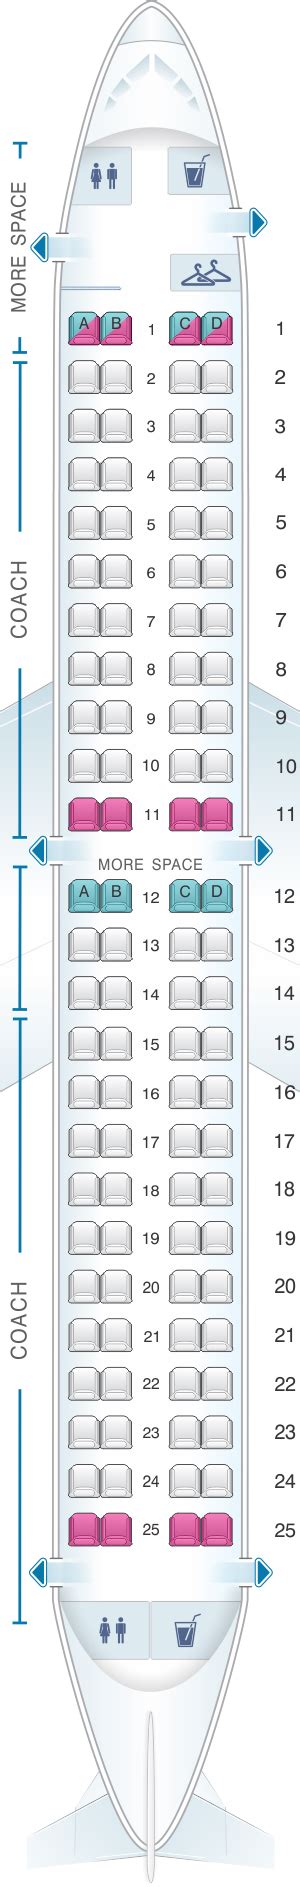 Airbus A320 Jetblue Seating